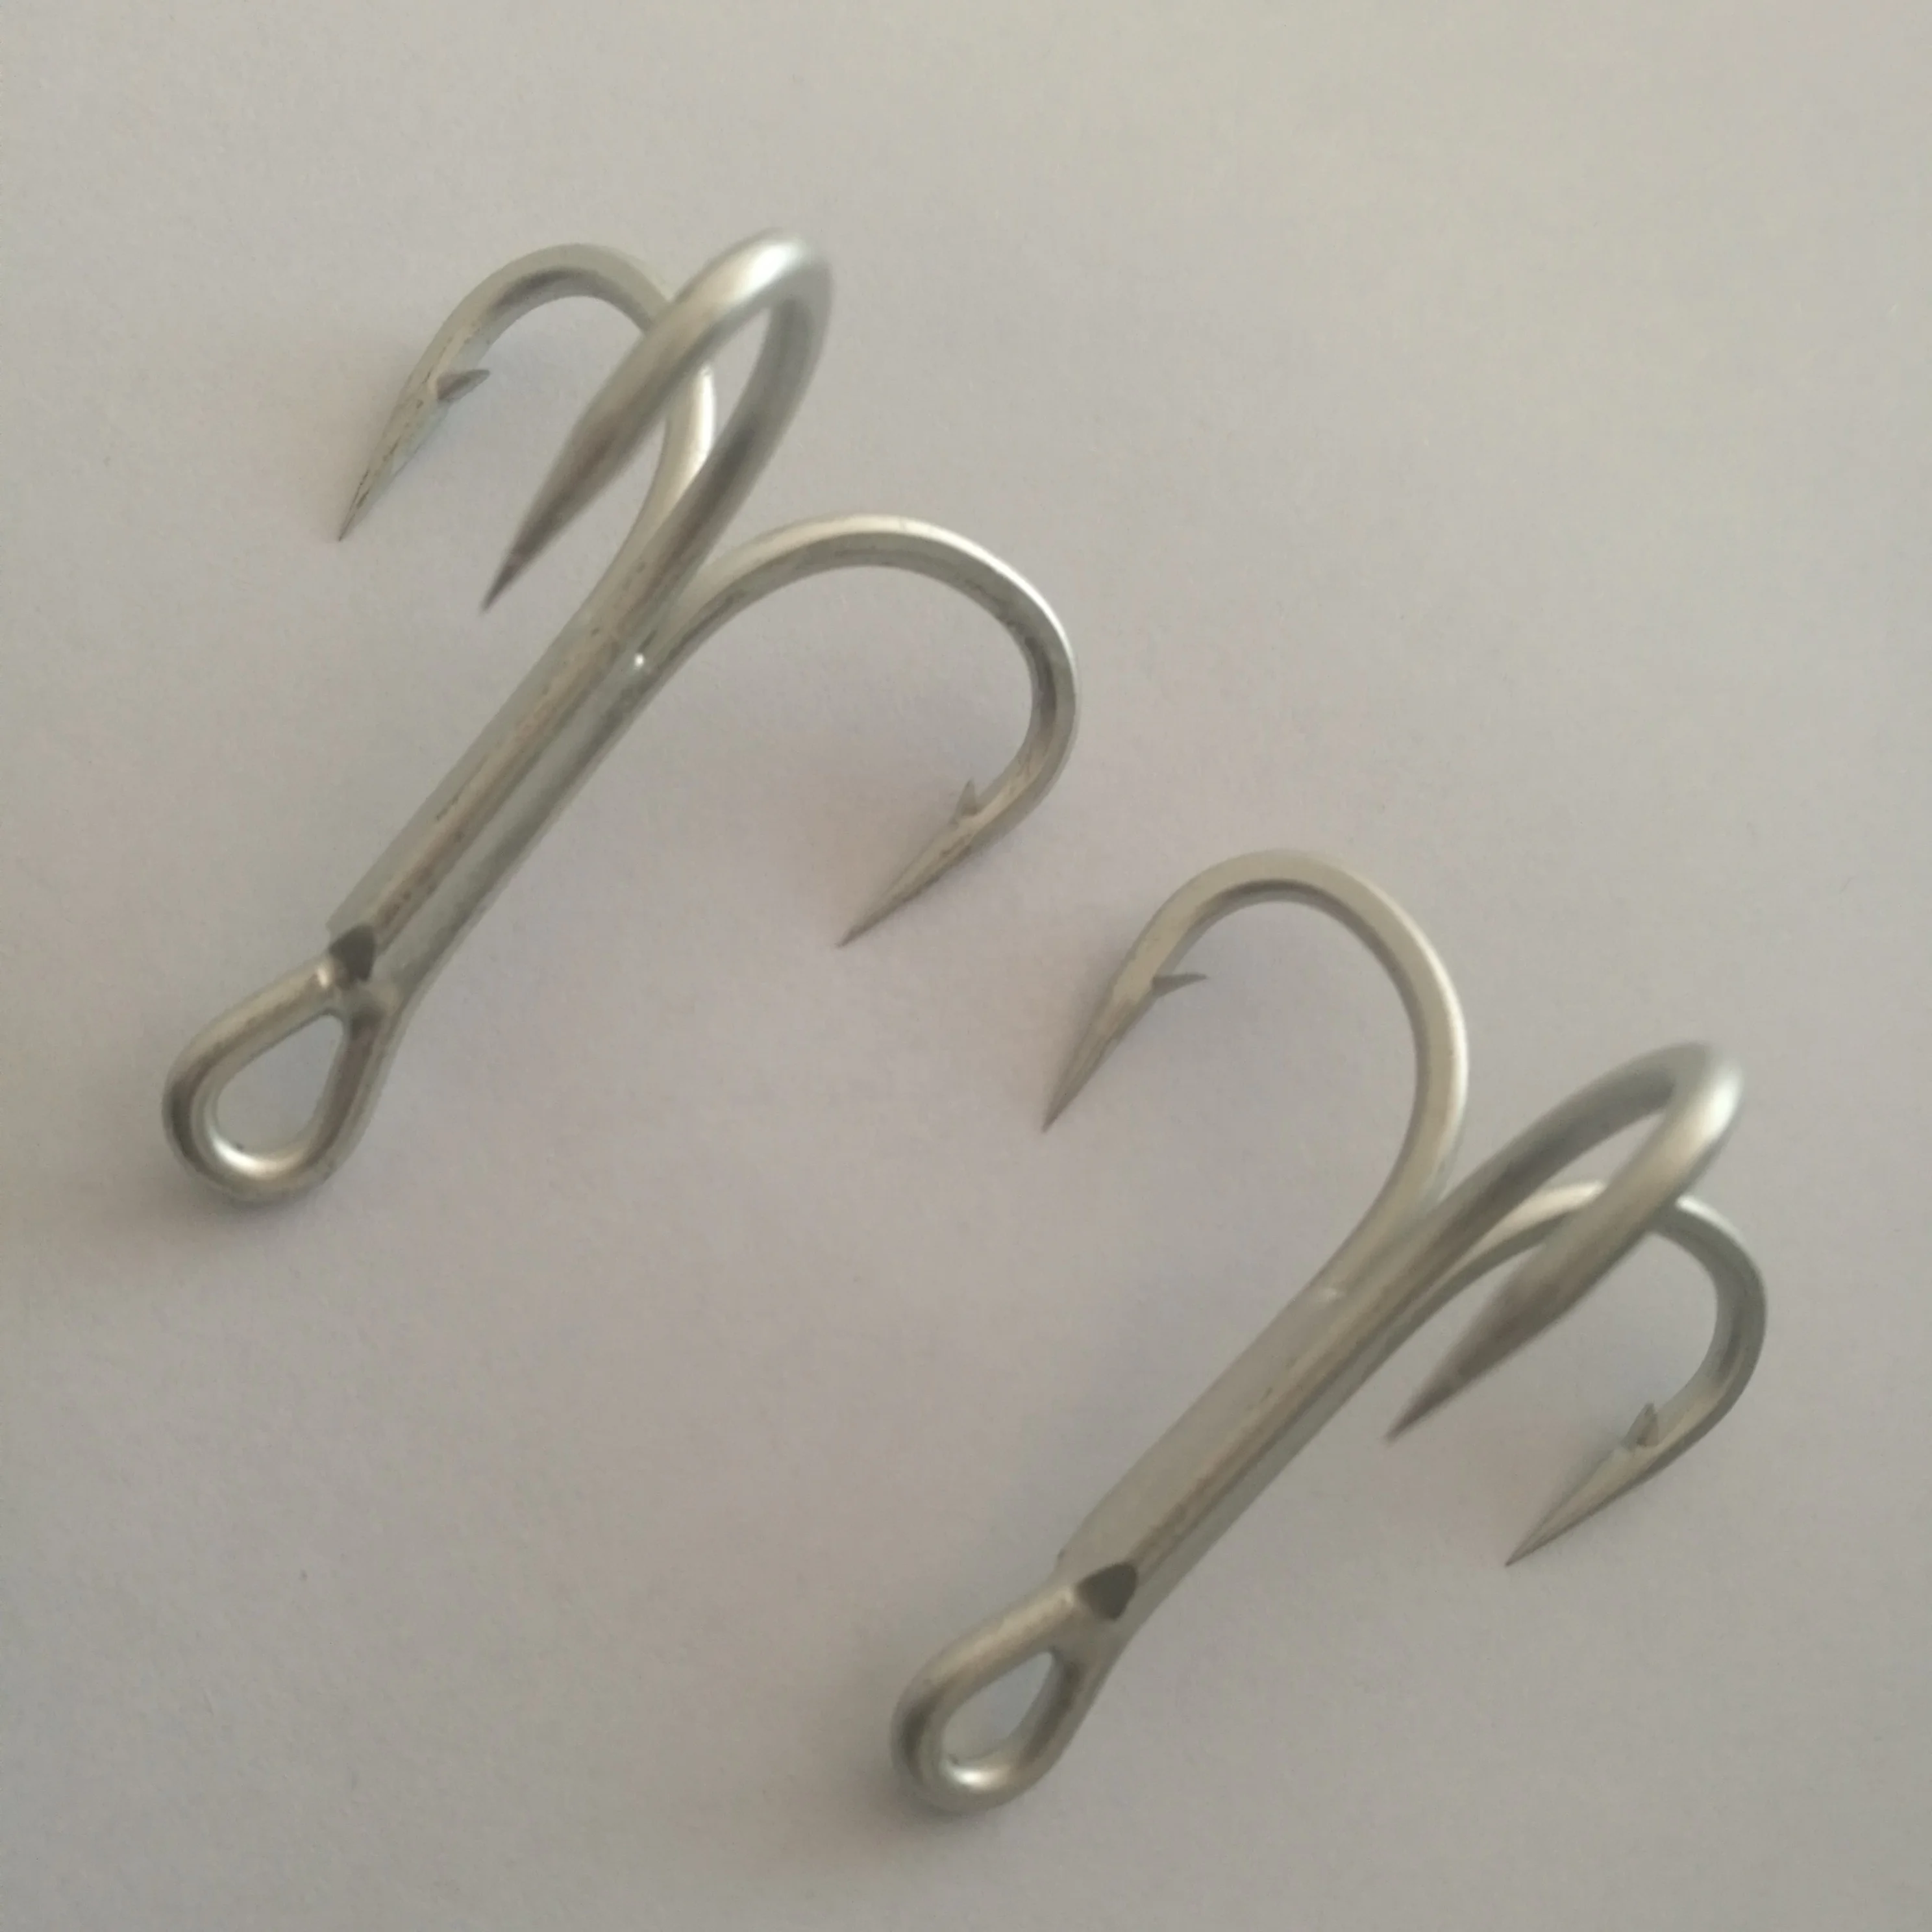  Treble Hooks 3X Strong Nickel Size 2/0 100 Pieces